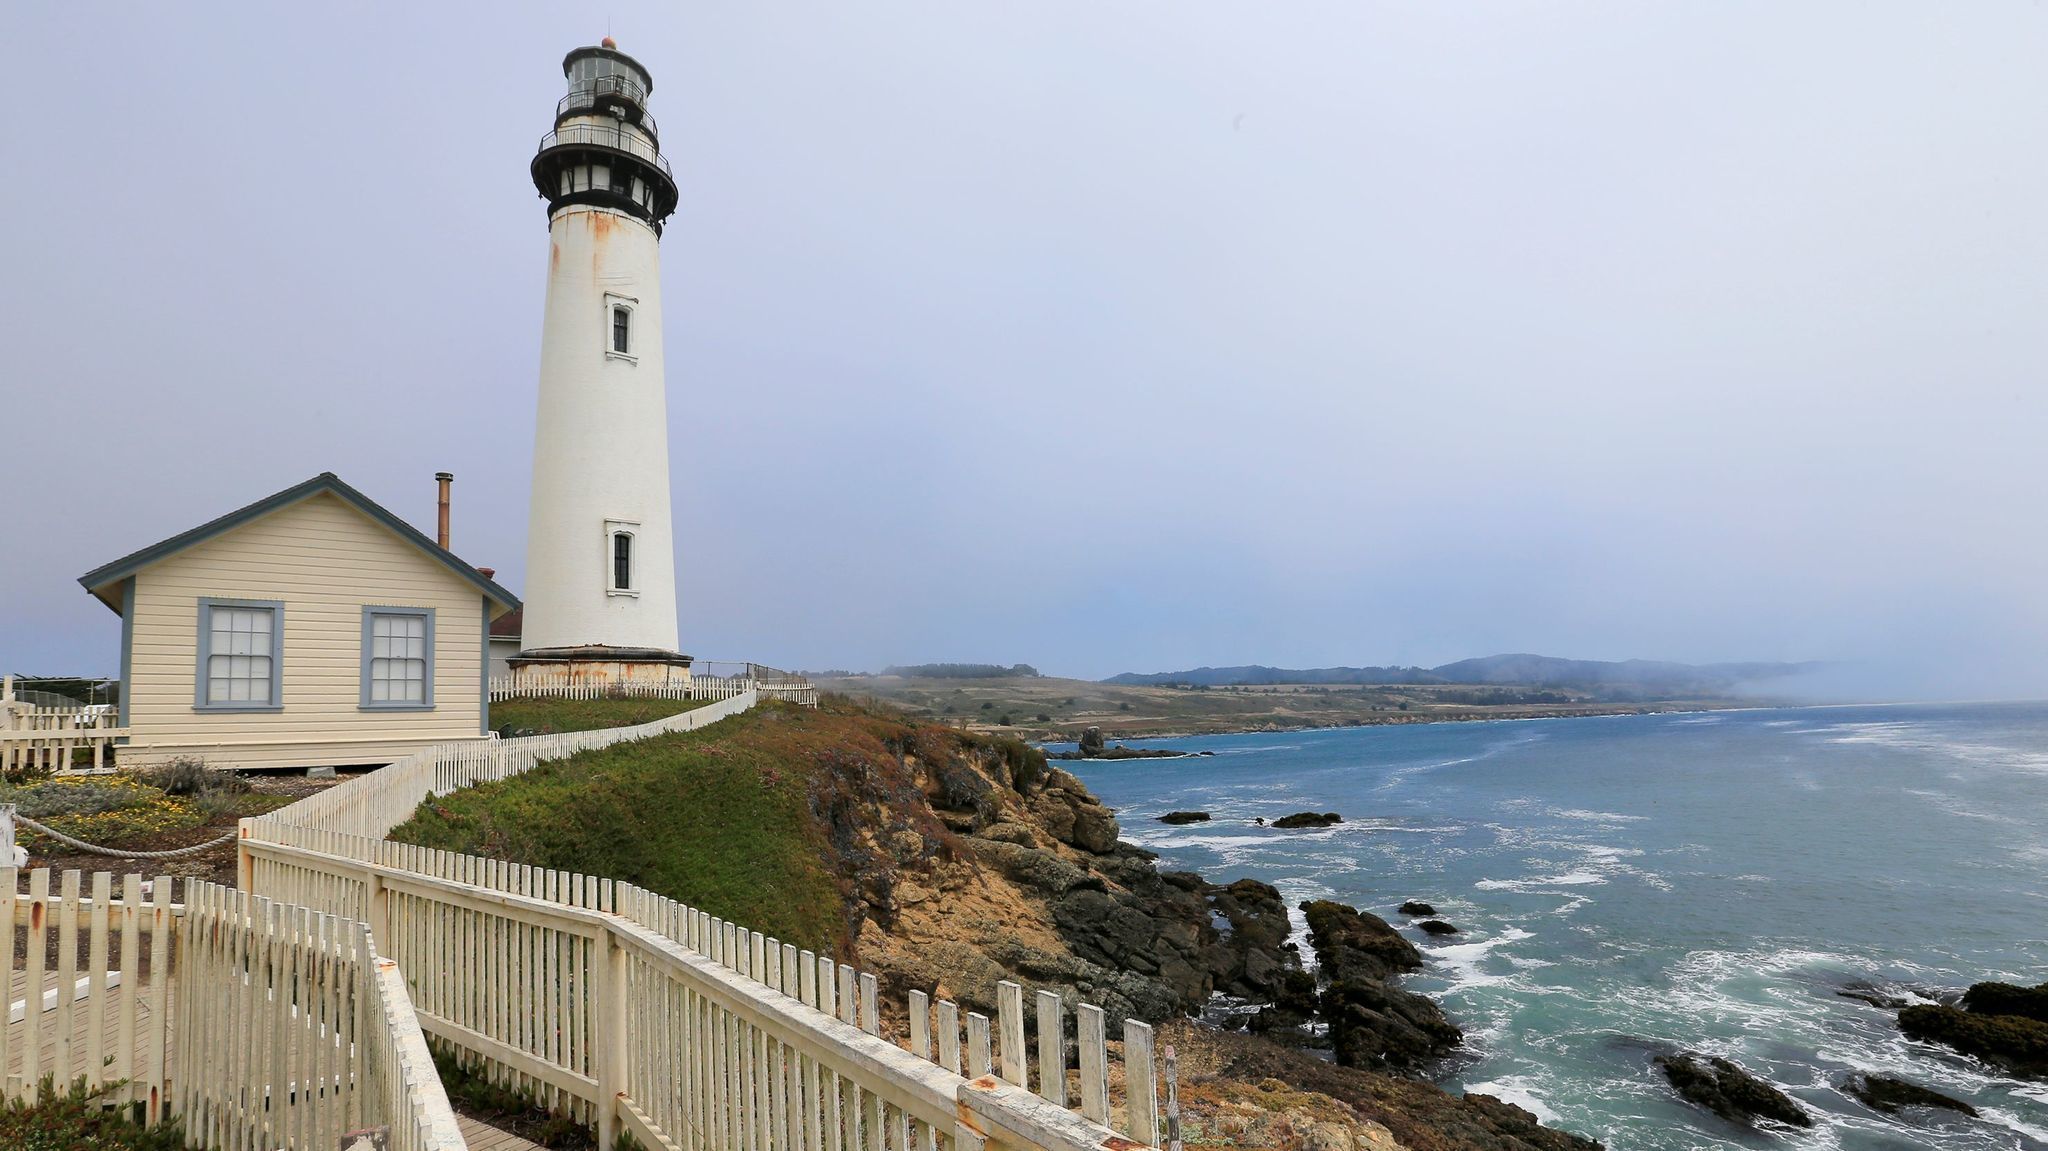 On a road trip up the coast, I linger too long over lighthouses and eat way too much pie. Surprised?